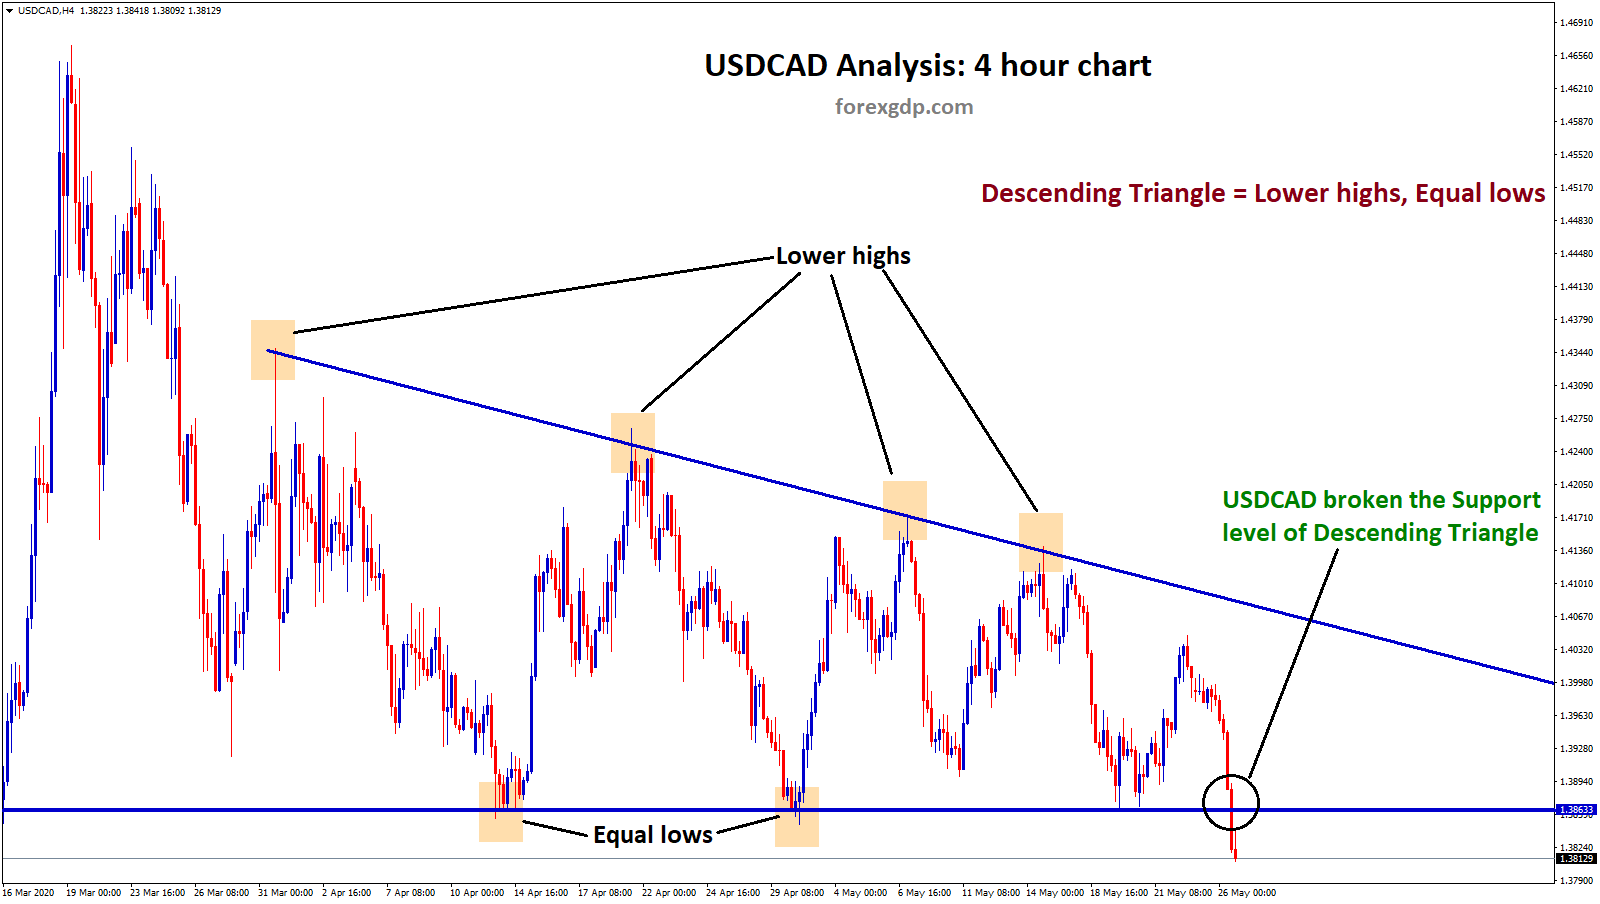 Descending Triangle breakout in USDCAD 4hr chart